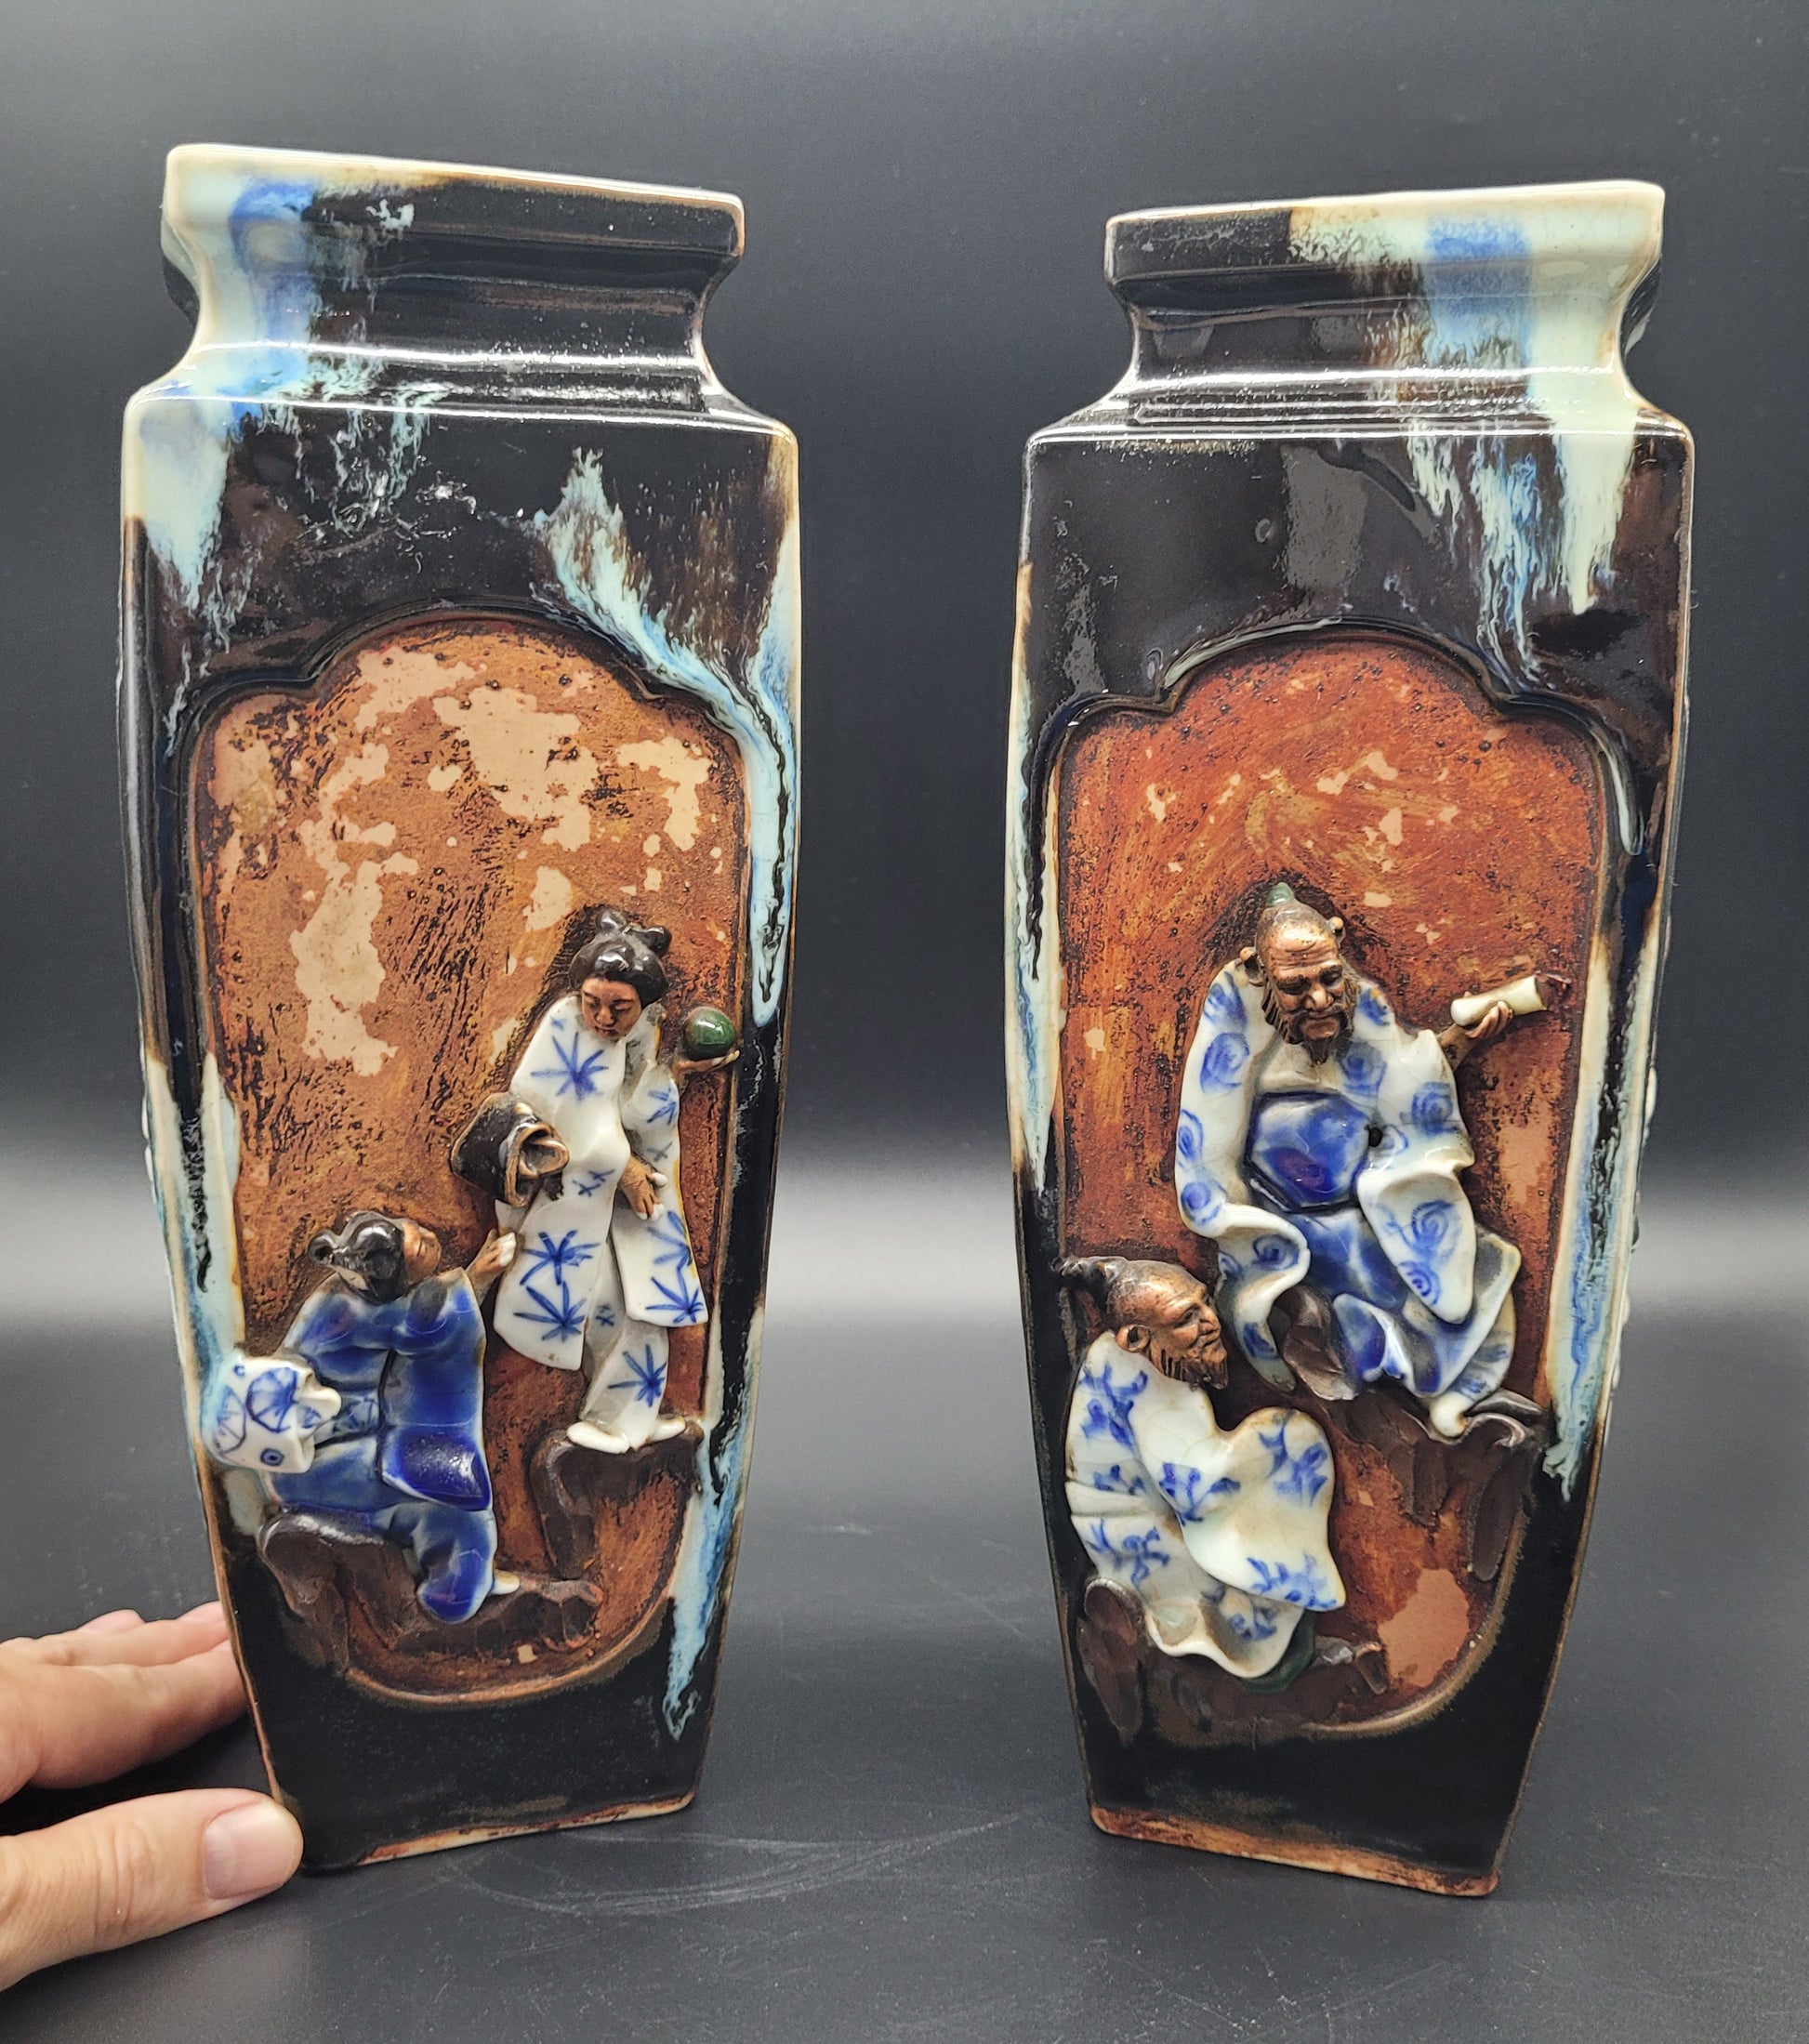 Highly Detailed Japanese Meiji Sumida Gawa Pottery Vases Signed By The Artist for sale at KB antiques 